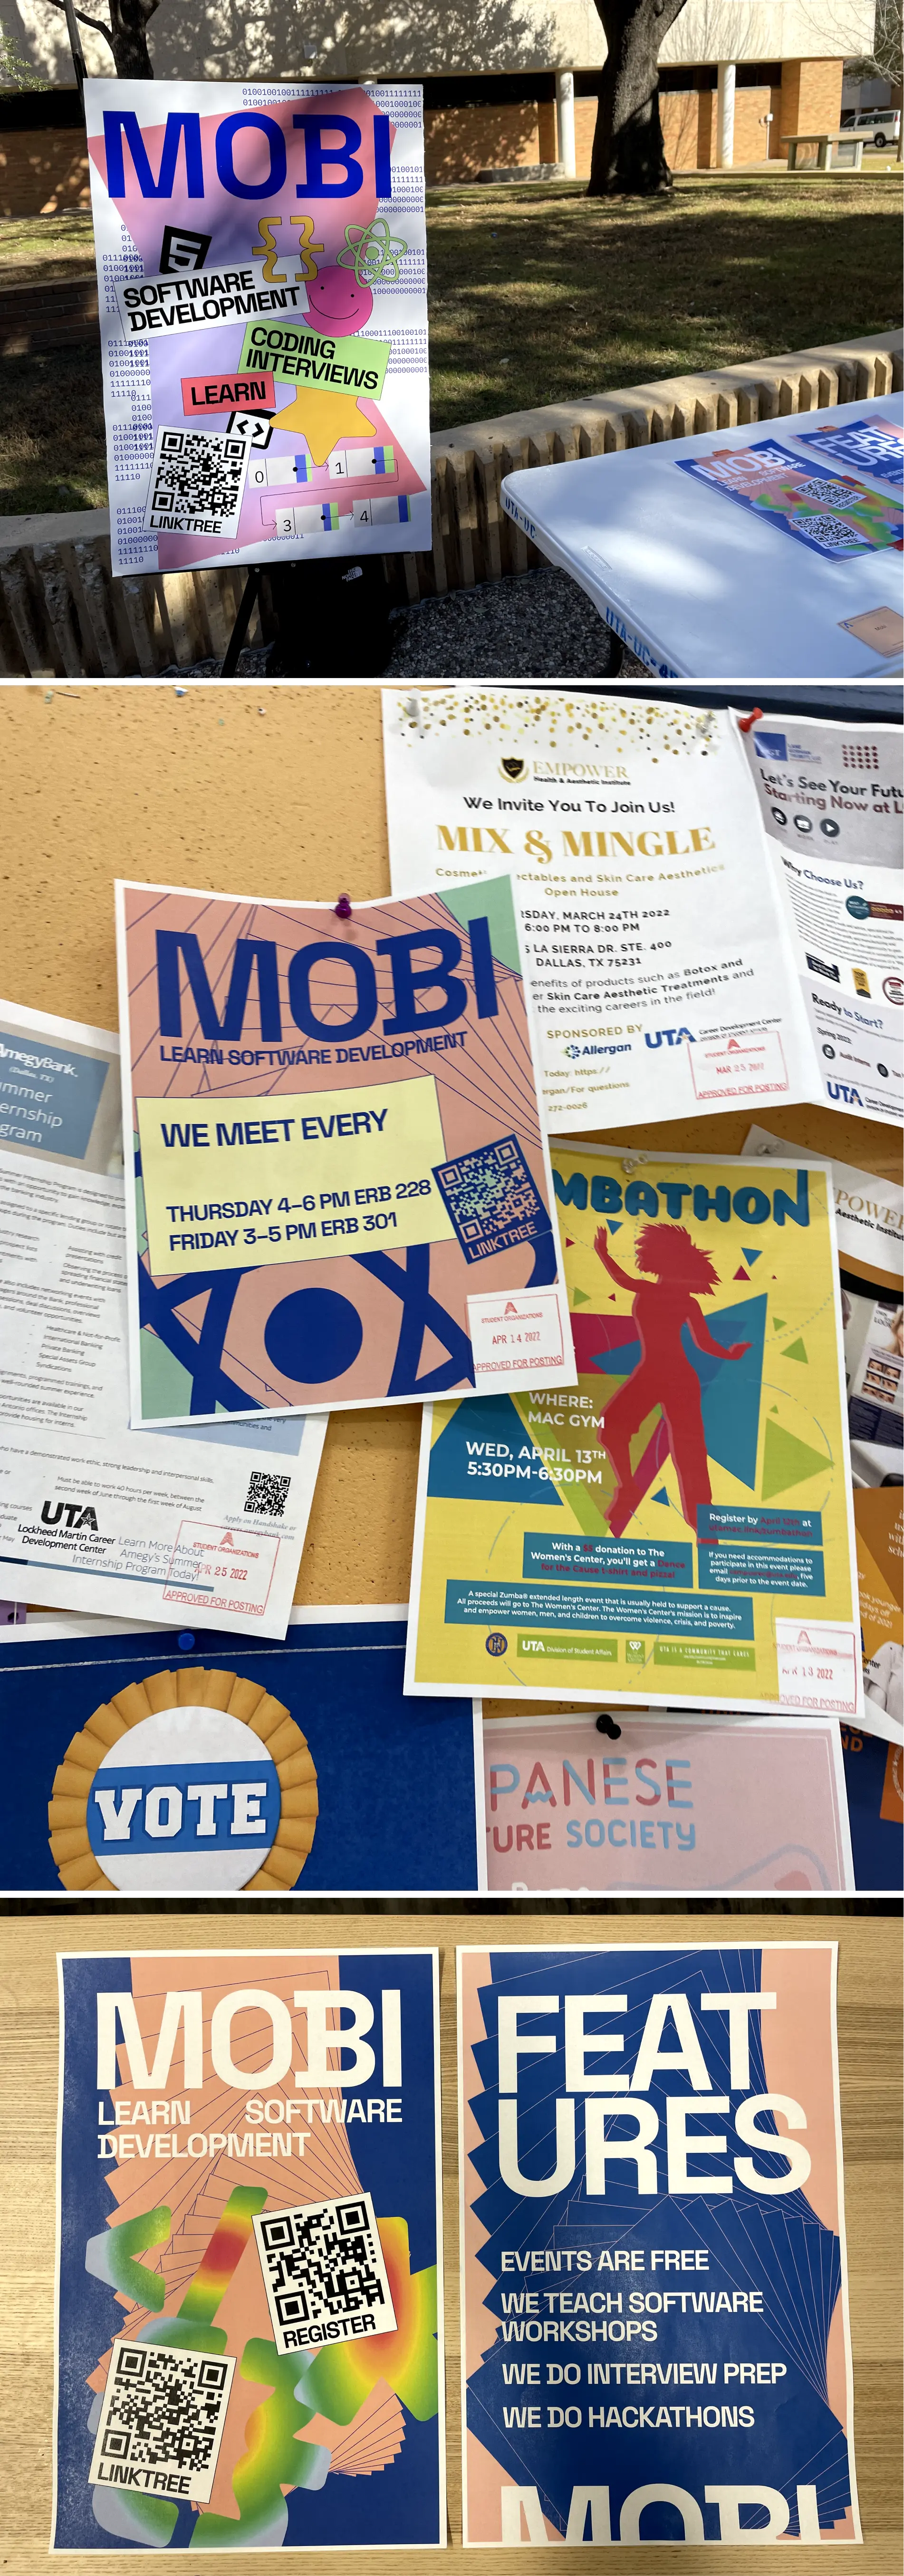 Designs of MOBI marketing materials printed and displayed in real life. There are pictures of posters and flyers posted and displayed around events.